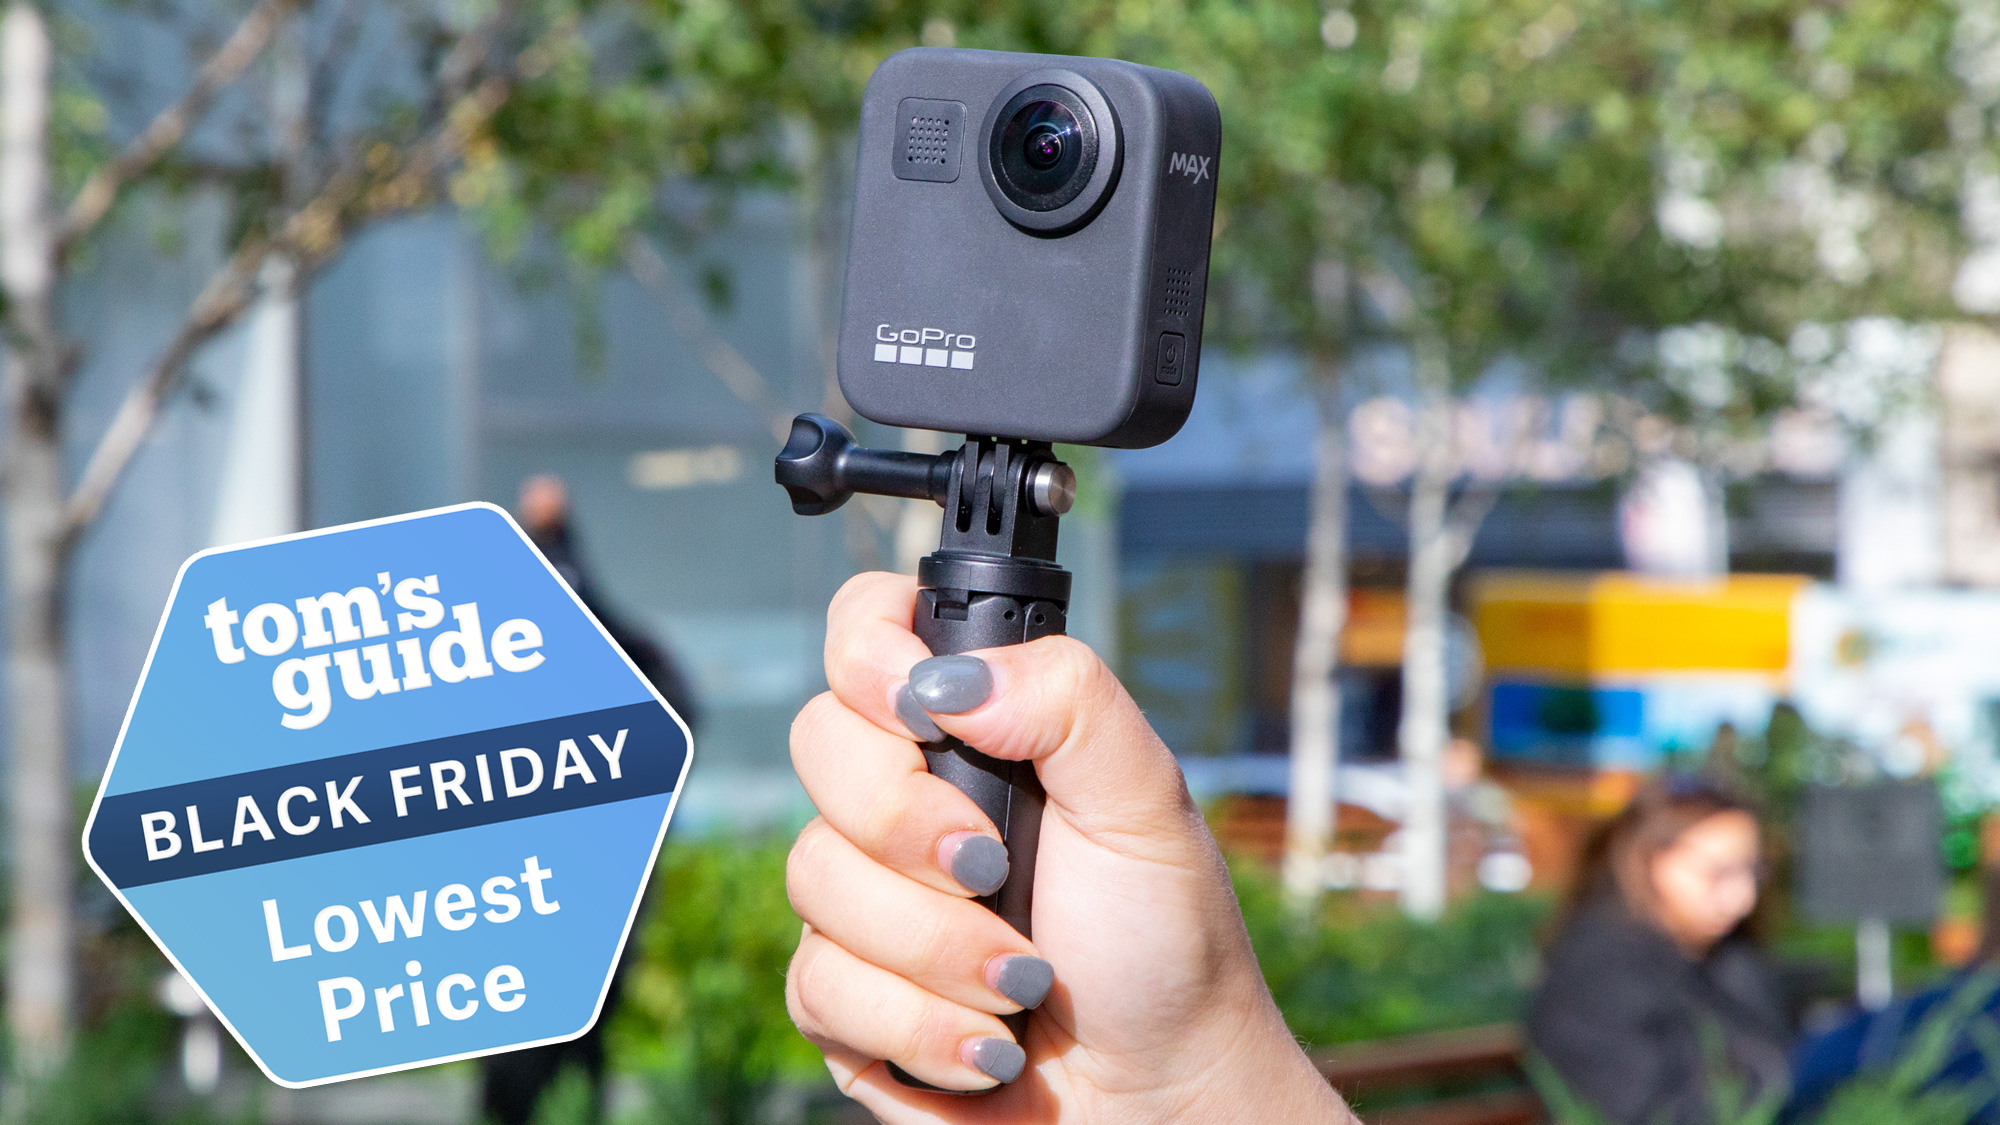 The GoPro Max is one of the best 360 cameras we've tested — and